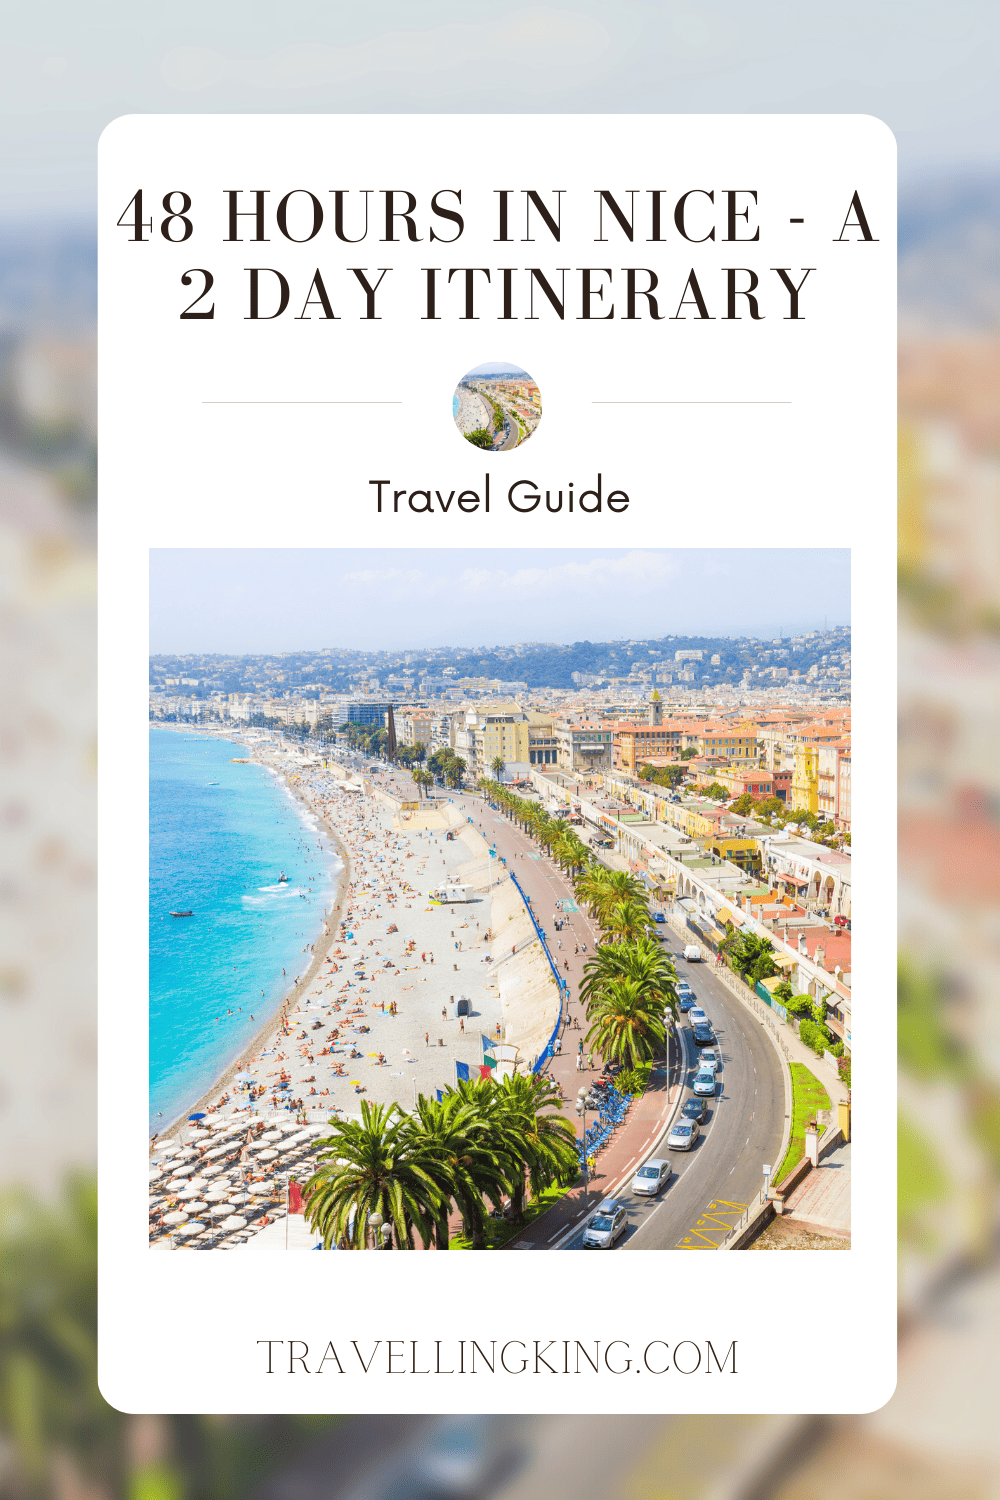 48 hours in Nice - A 2 day Itinerary